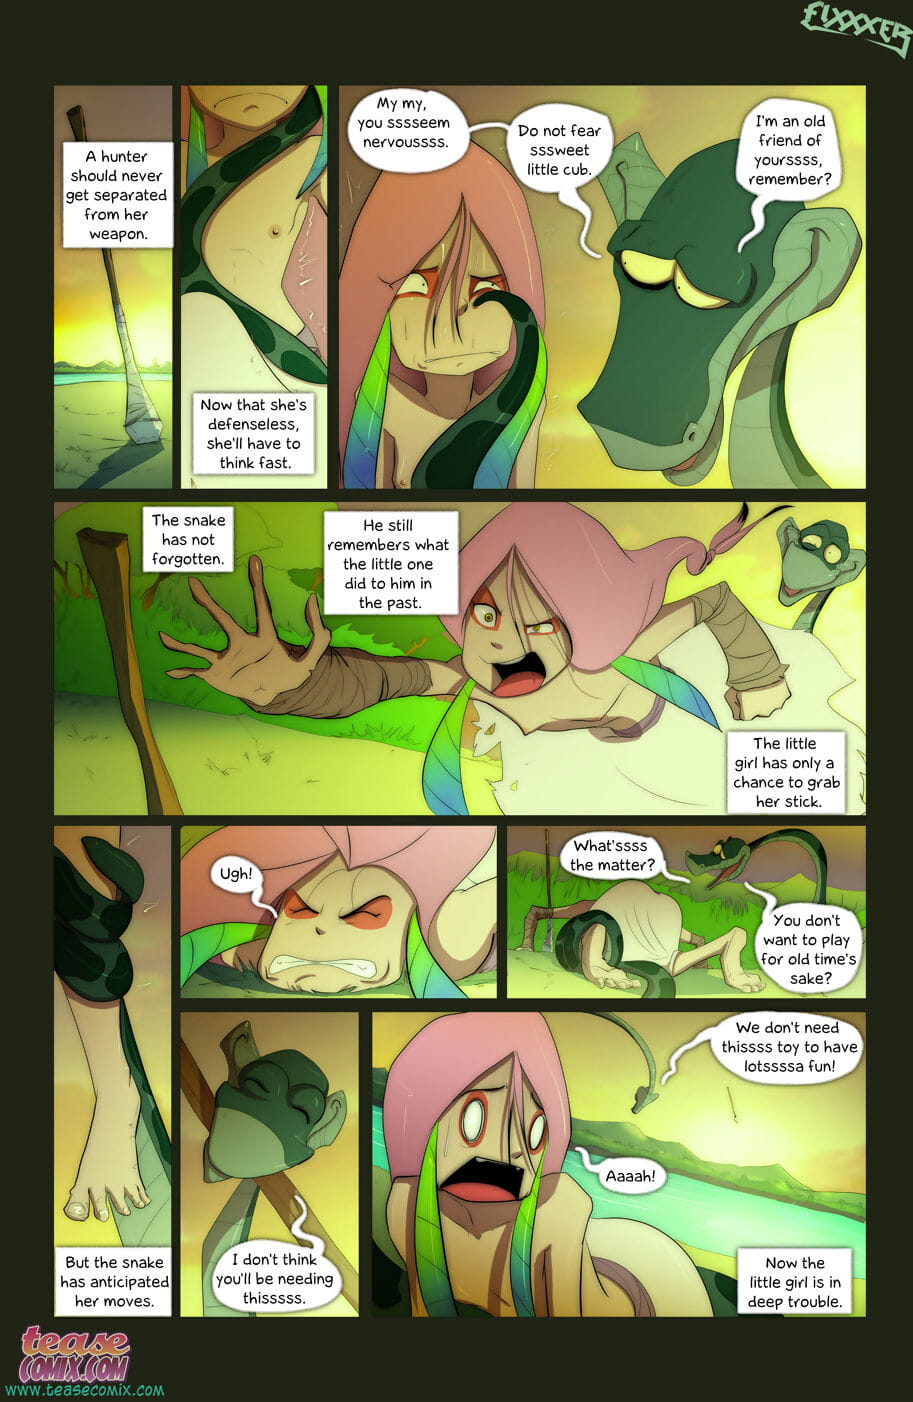 Of the Snake and the Girl - part 2